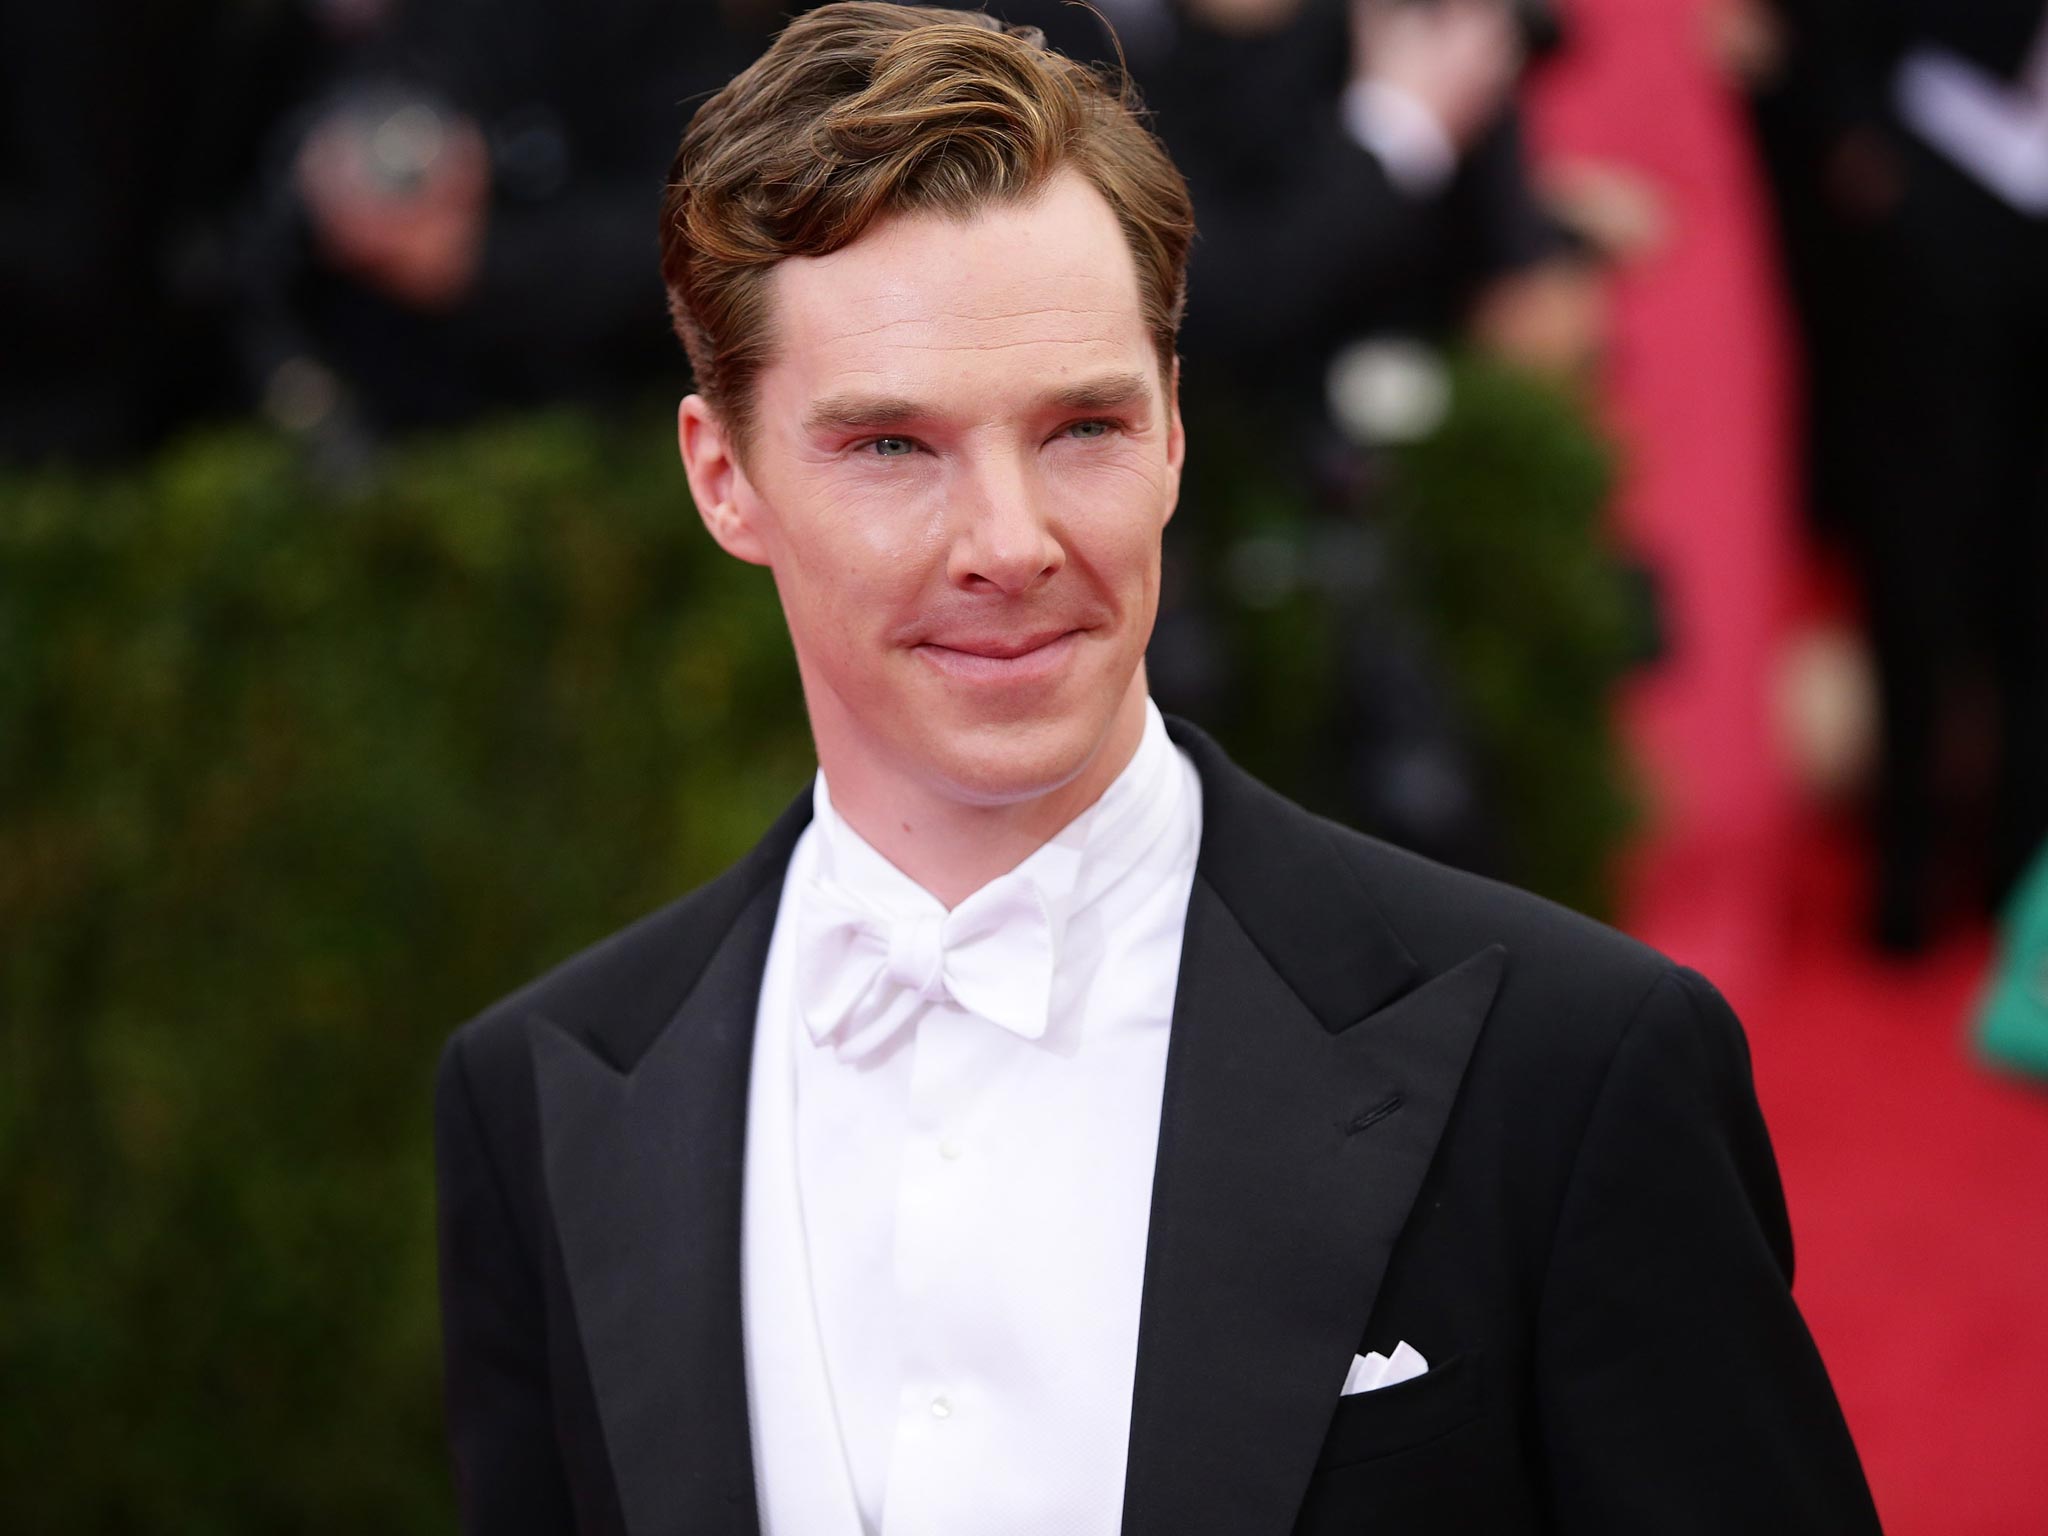 Benedict Cumberbatch appears in The Imitation Game